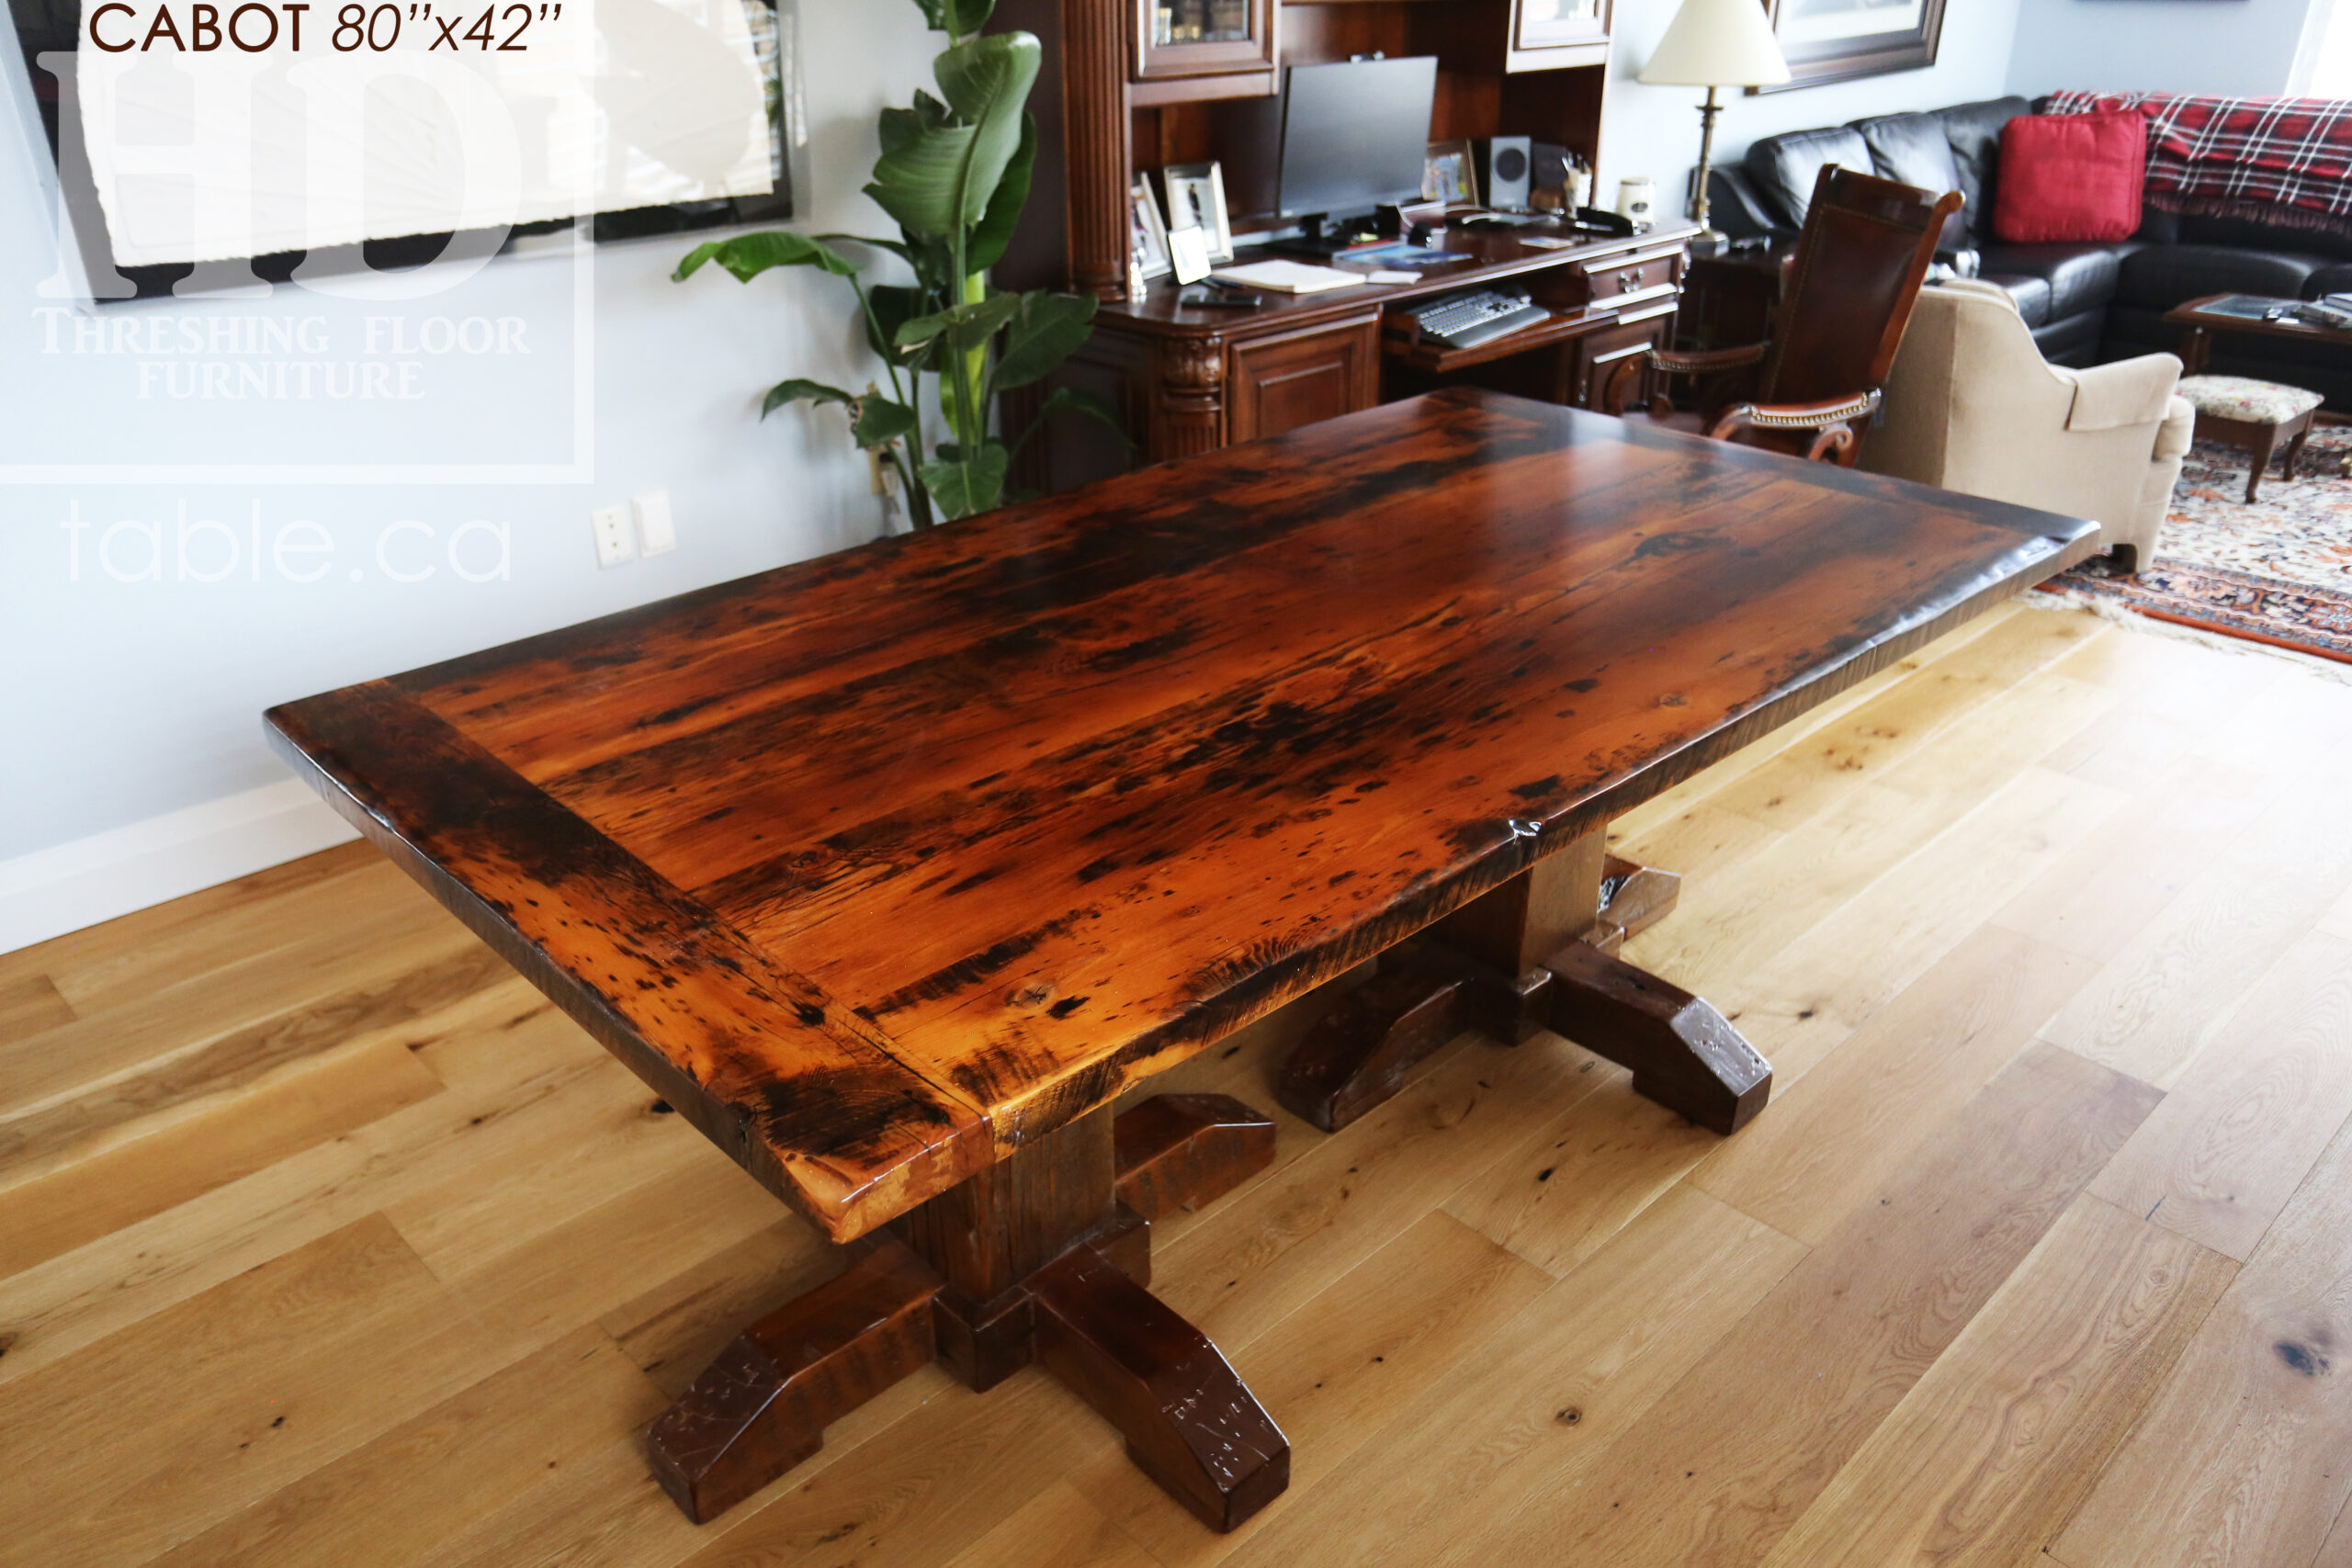 Project details: 80” Reclaimed Ontario Barnwood Table we made for a Oakville, Ontario home – Double Hand Hewn Beam Posts Base  - Old Growth Hemlock Threshing Floor Construction – Original edges & distressing maintained – Bread Edge Ends - Premium epoxy + satin polyurethane finish - www.table.ca